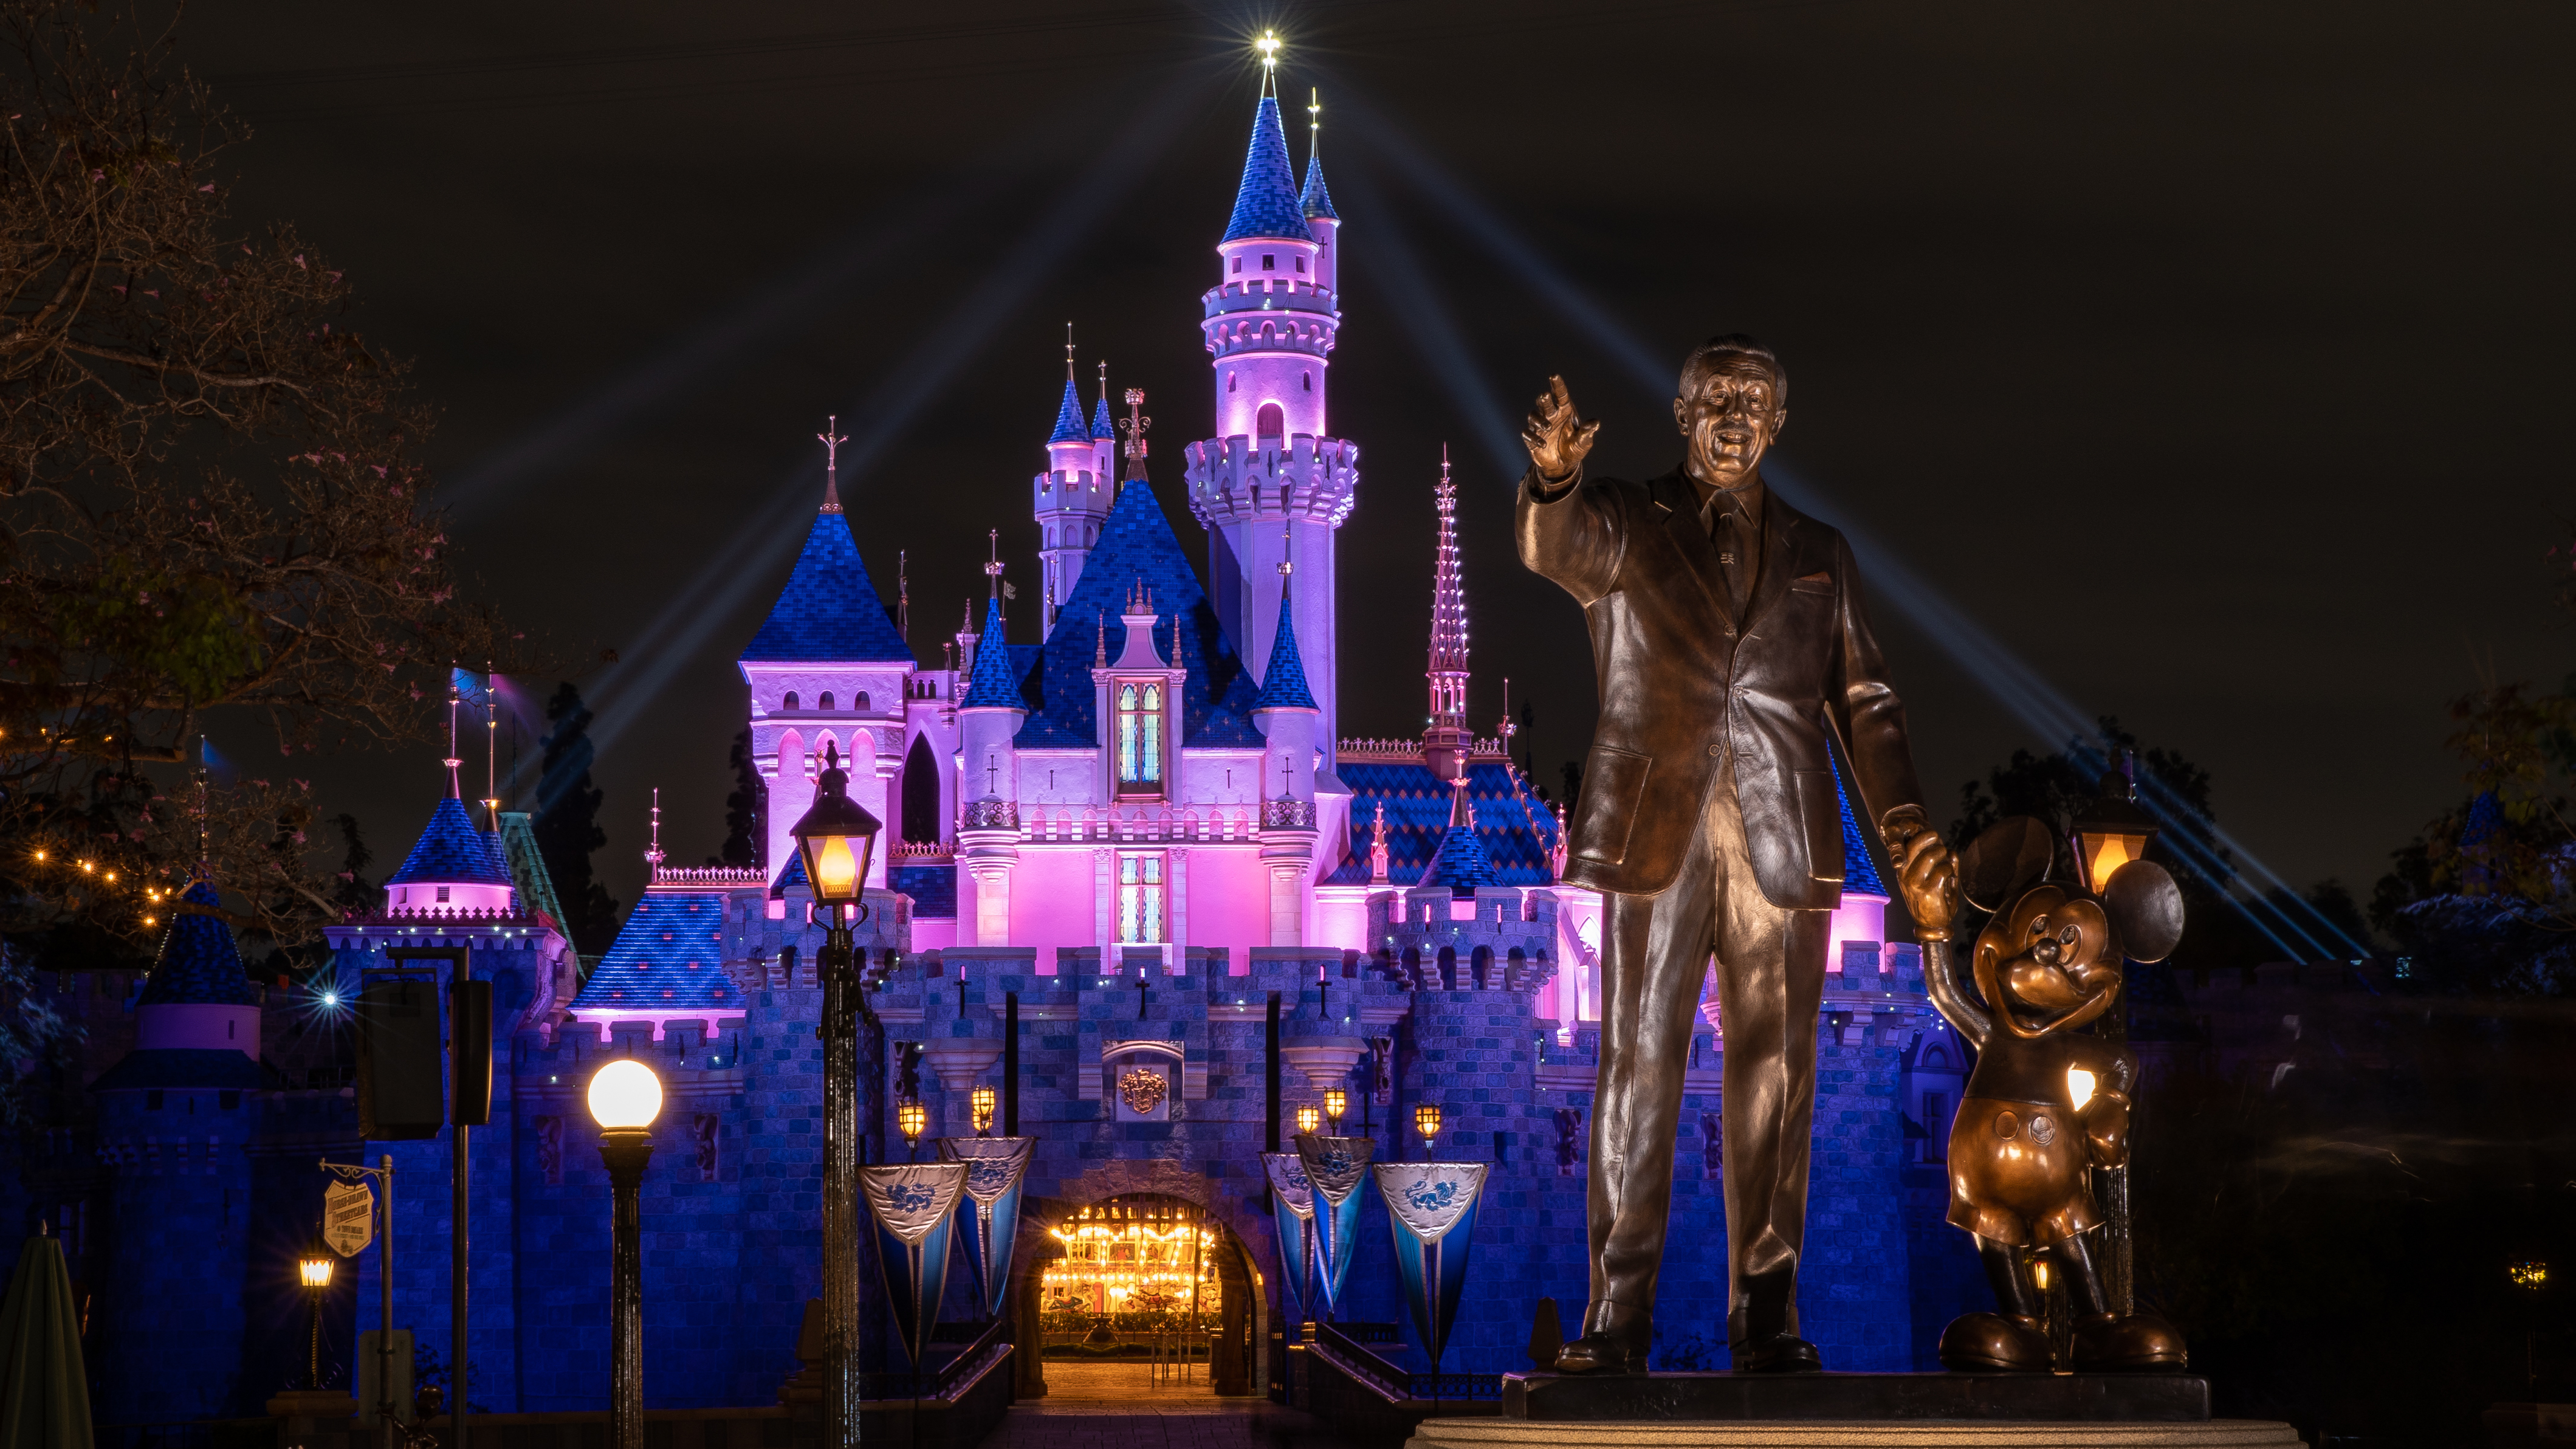 ANAHEIM, CA - APRIL 26: In this handout photo provided by Disneyland Resort, a view of Sleeping Beauty Castle in Disneyland Park illuminated during a special live streamed moment to welcome Cast Members back to the resort on April 26, 2021 at Disneyland Resort in Anaheim, California. Disneyland Resort theme parks will reopen to guests on Friday, April 30, 2021. (Photo by Christian Thompson/Disneyland Resort via Getty Images)